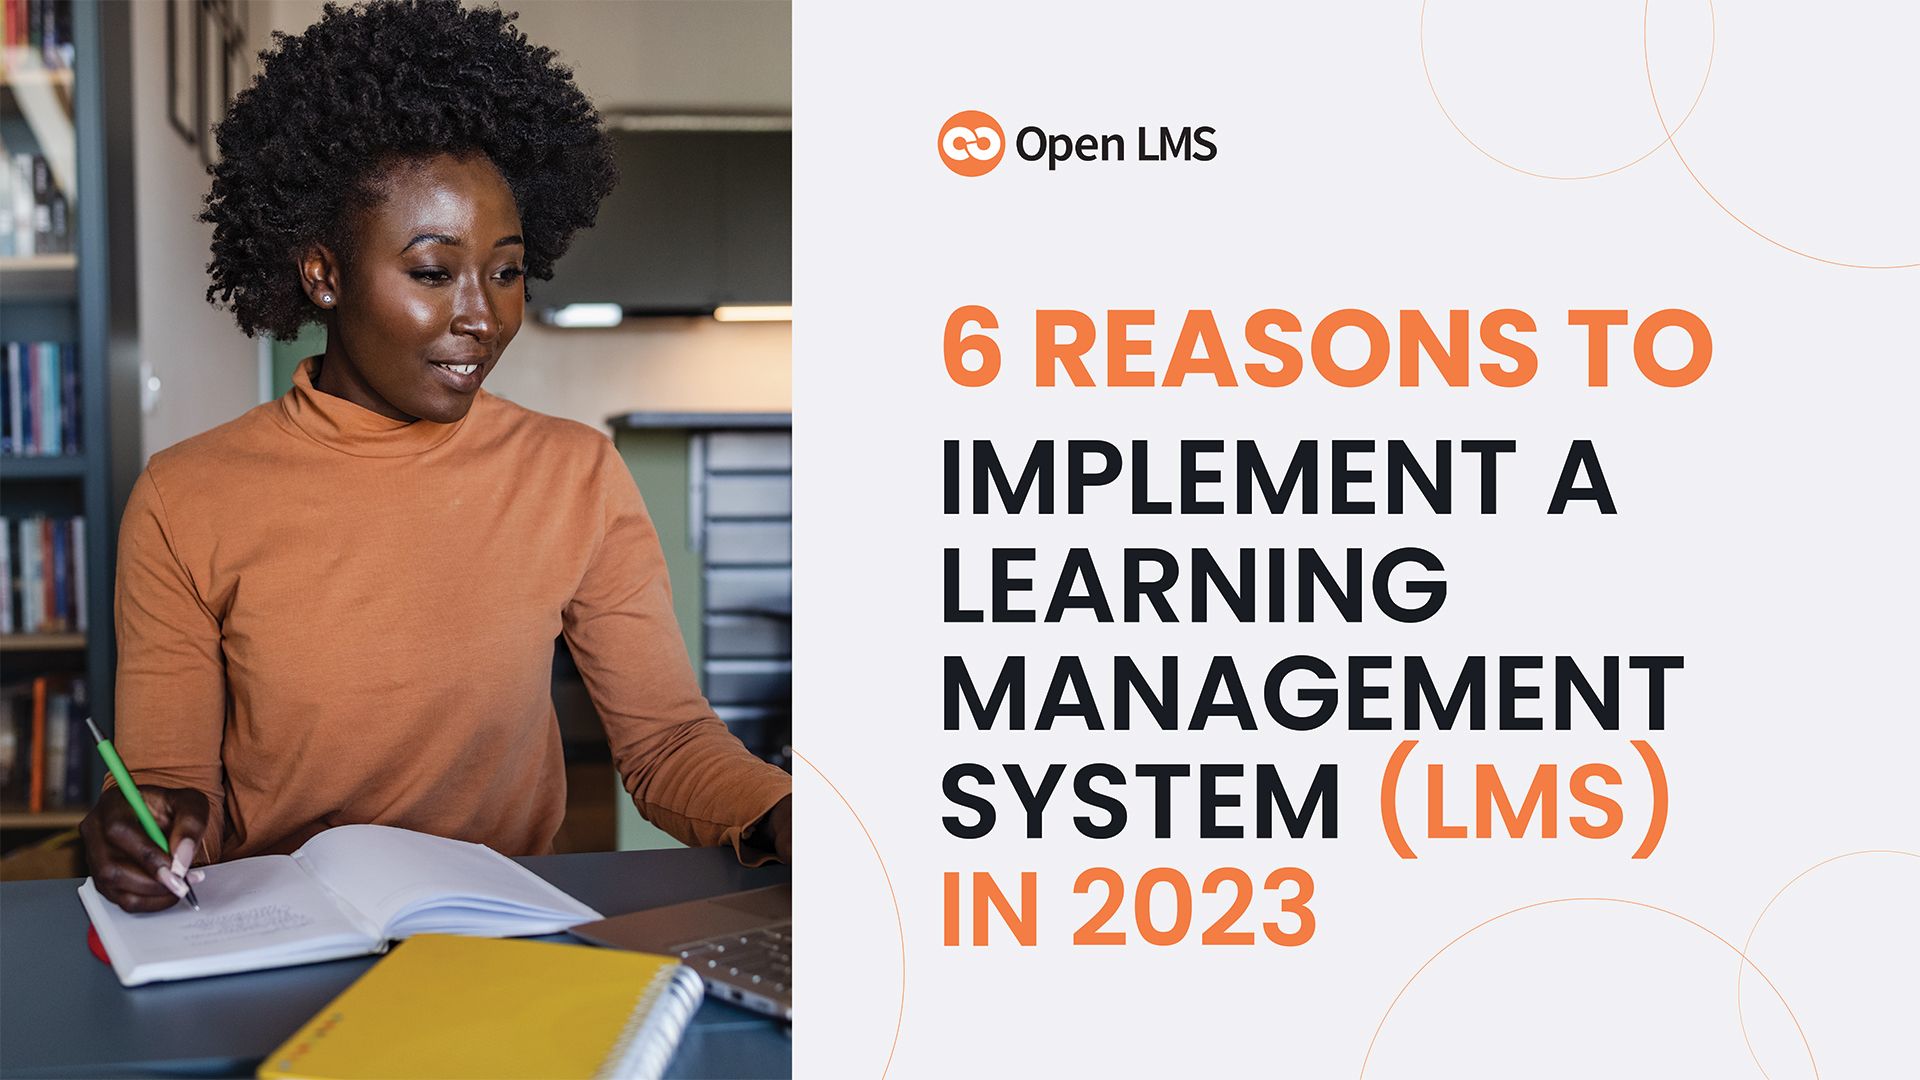 6 Reasons to Implement a Learning Management System (LMS) in 2023